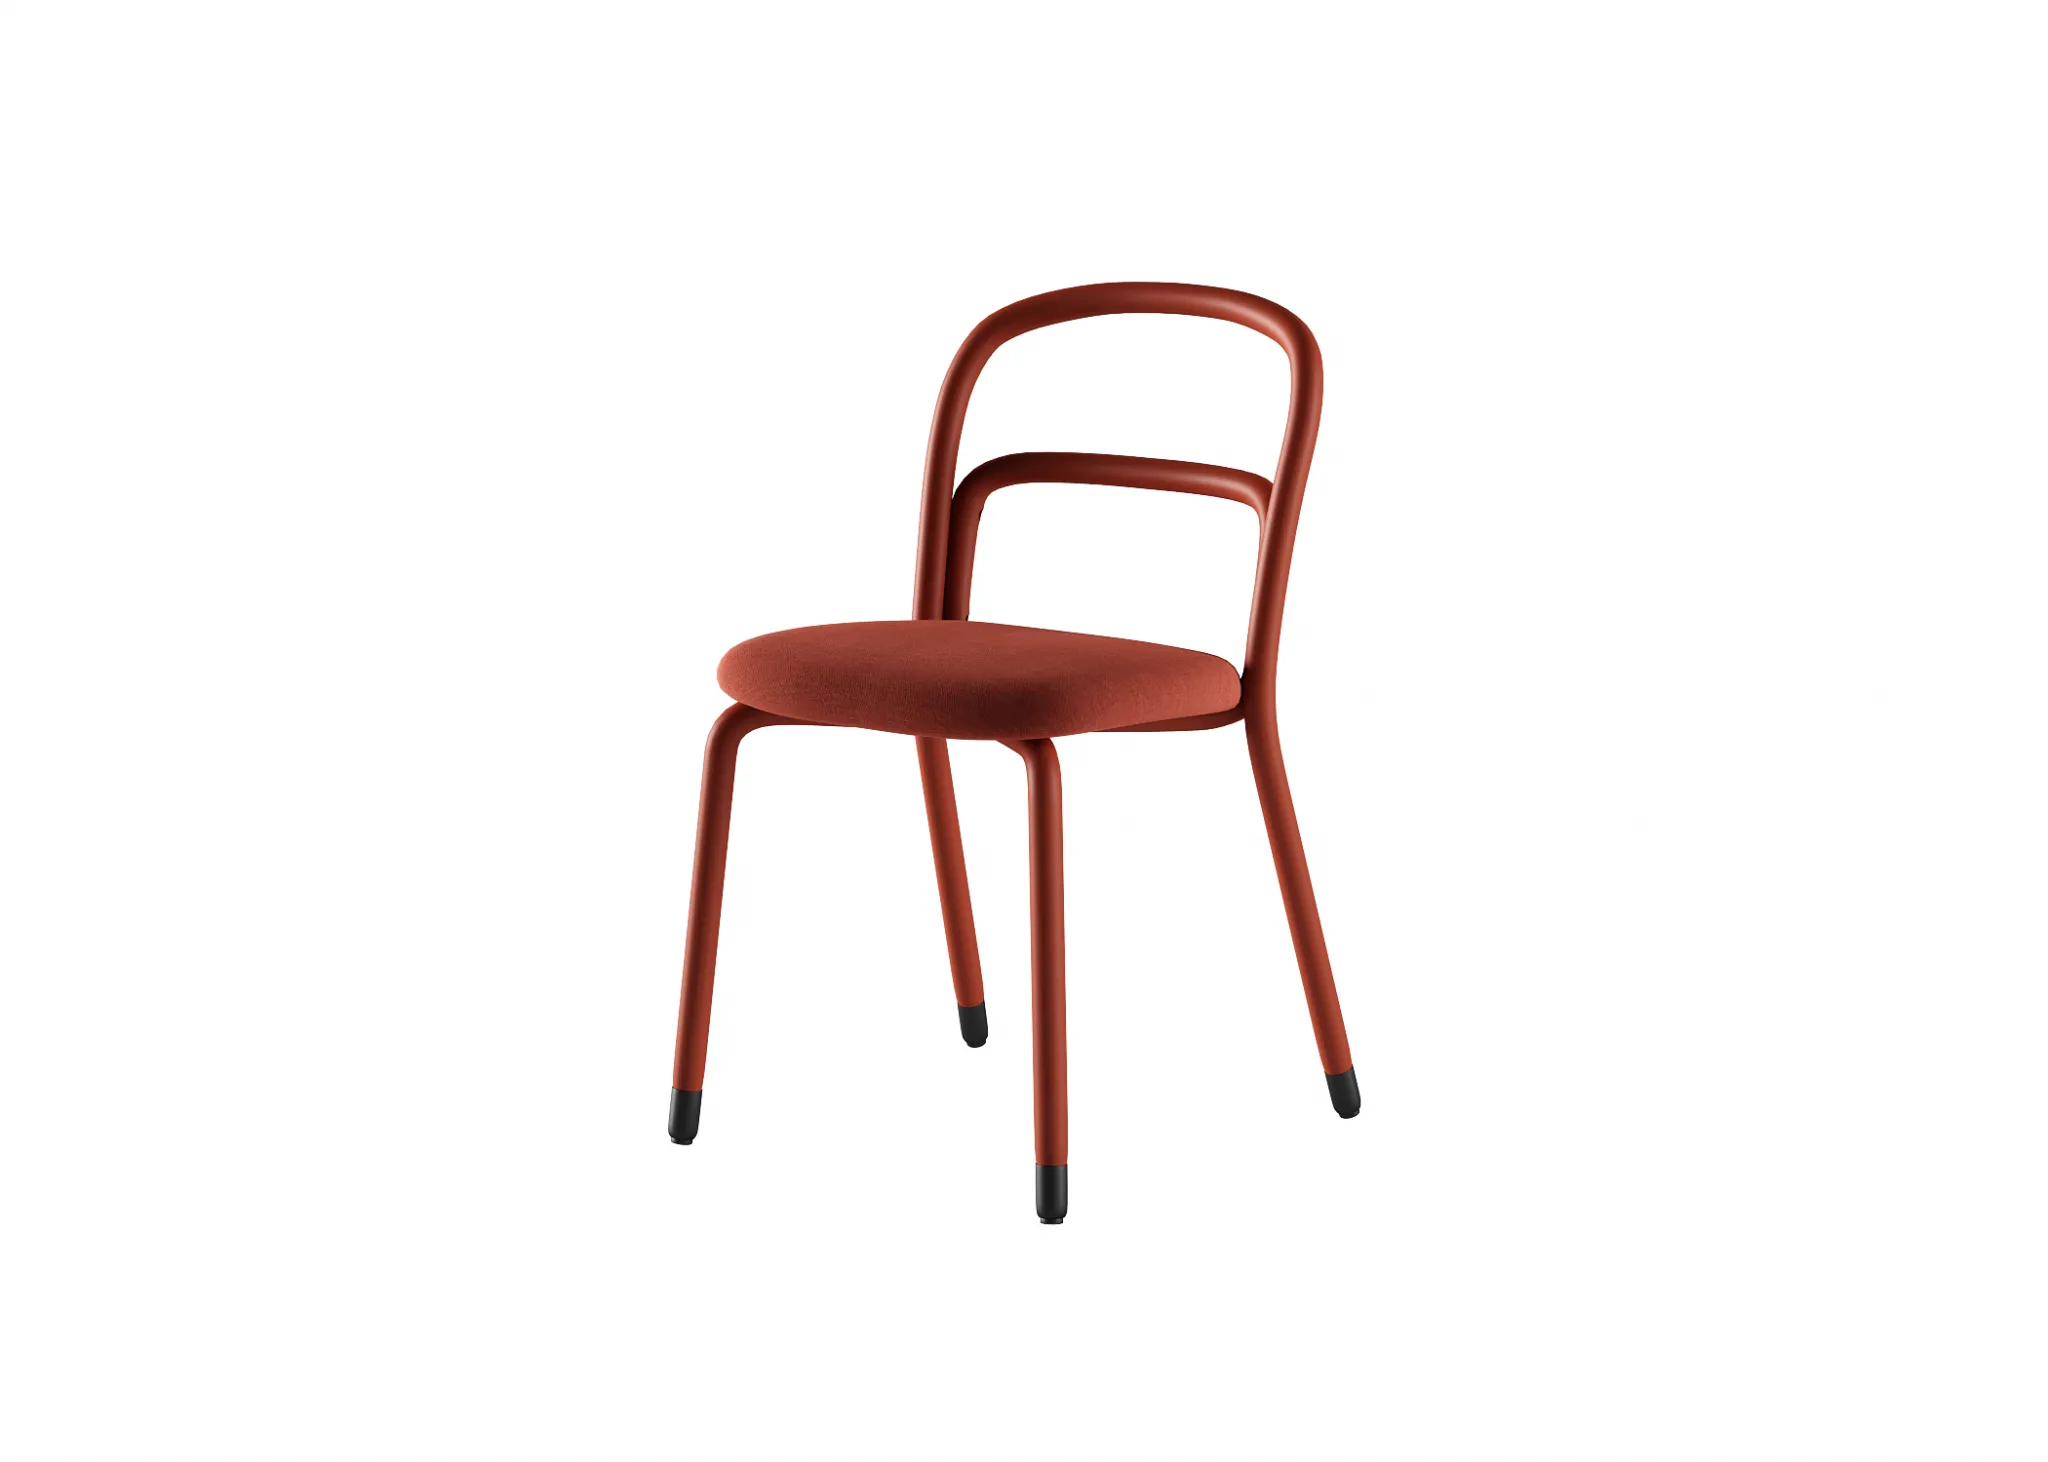 FURNITURE 3D MODELS – CHAIRS – 0154